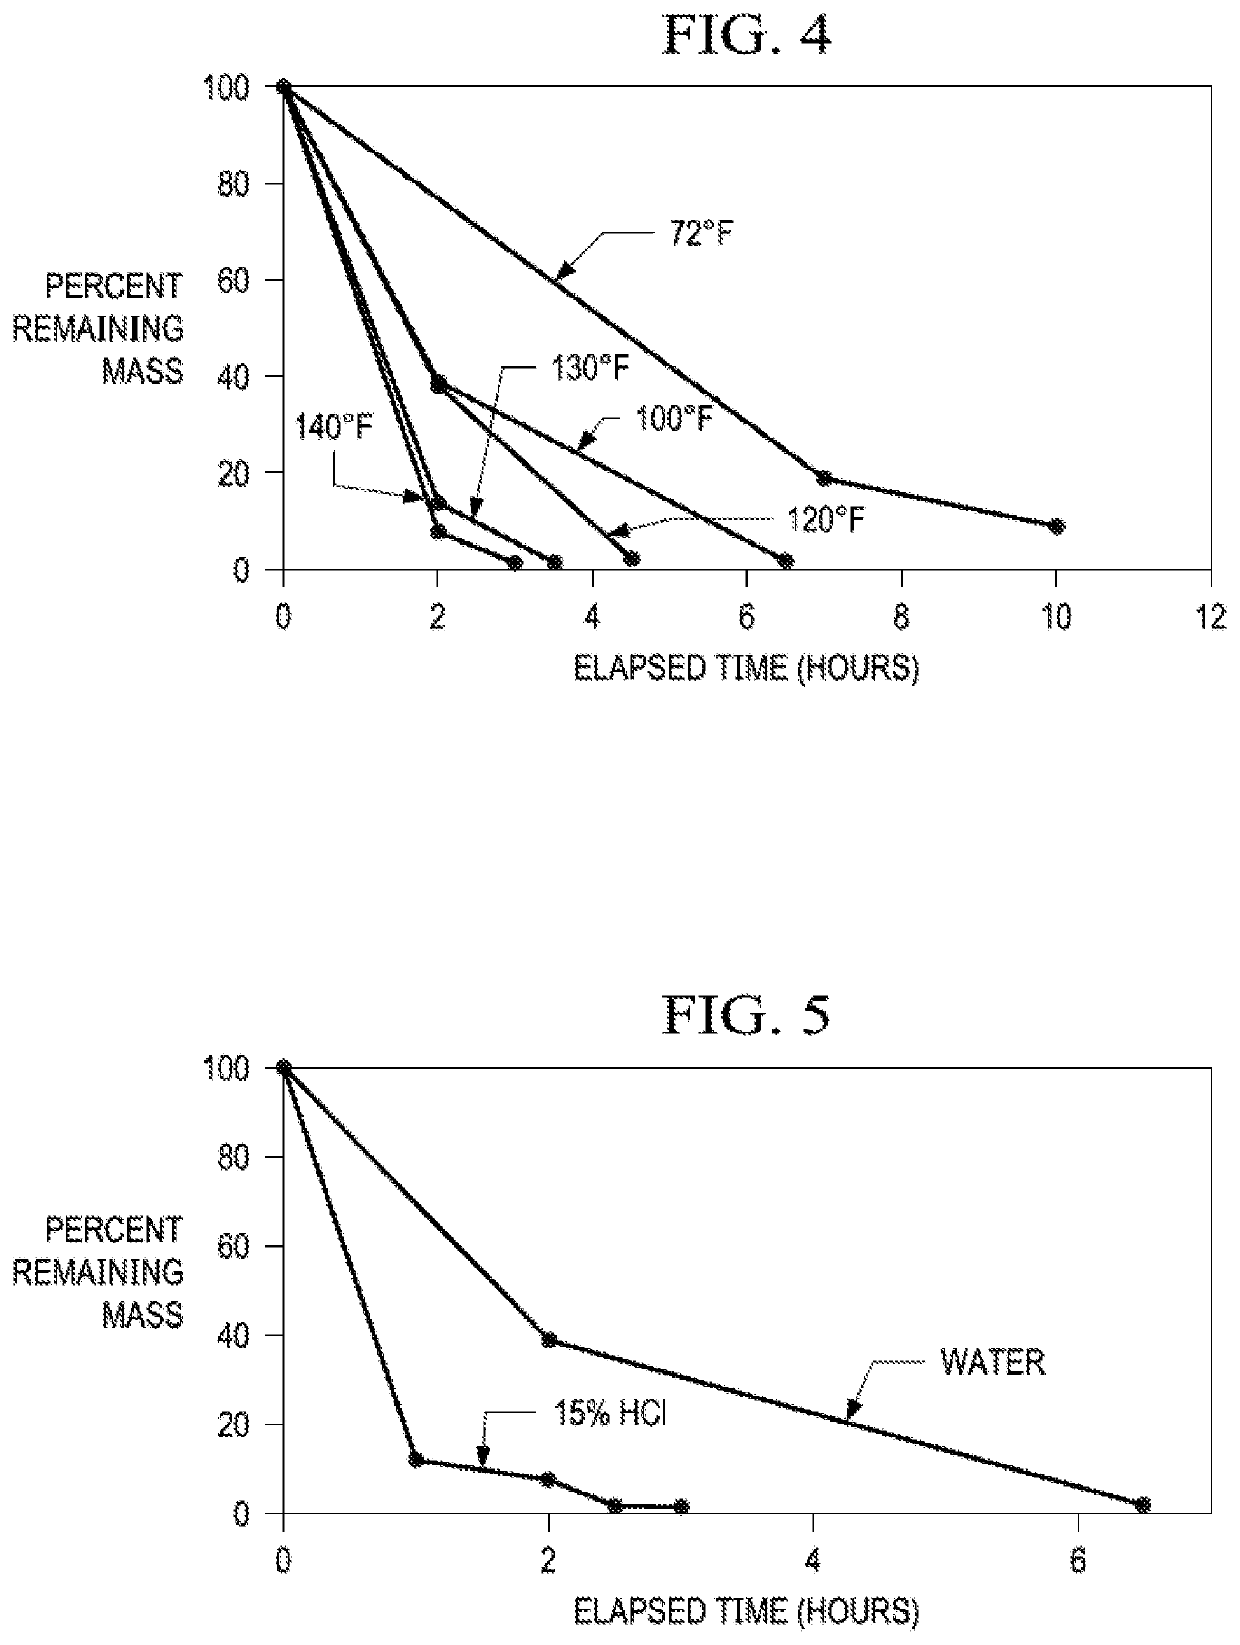 Low temperature diversion in well completion operations using natural mineral compound